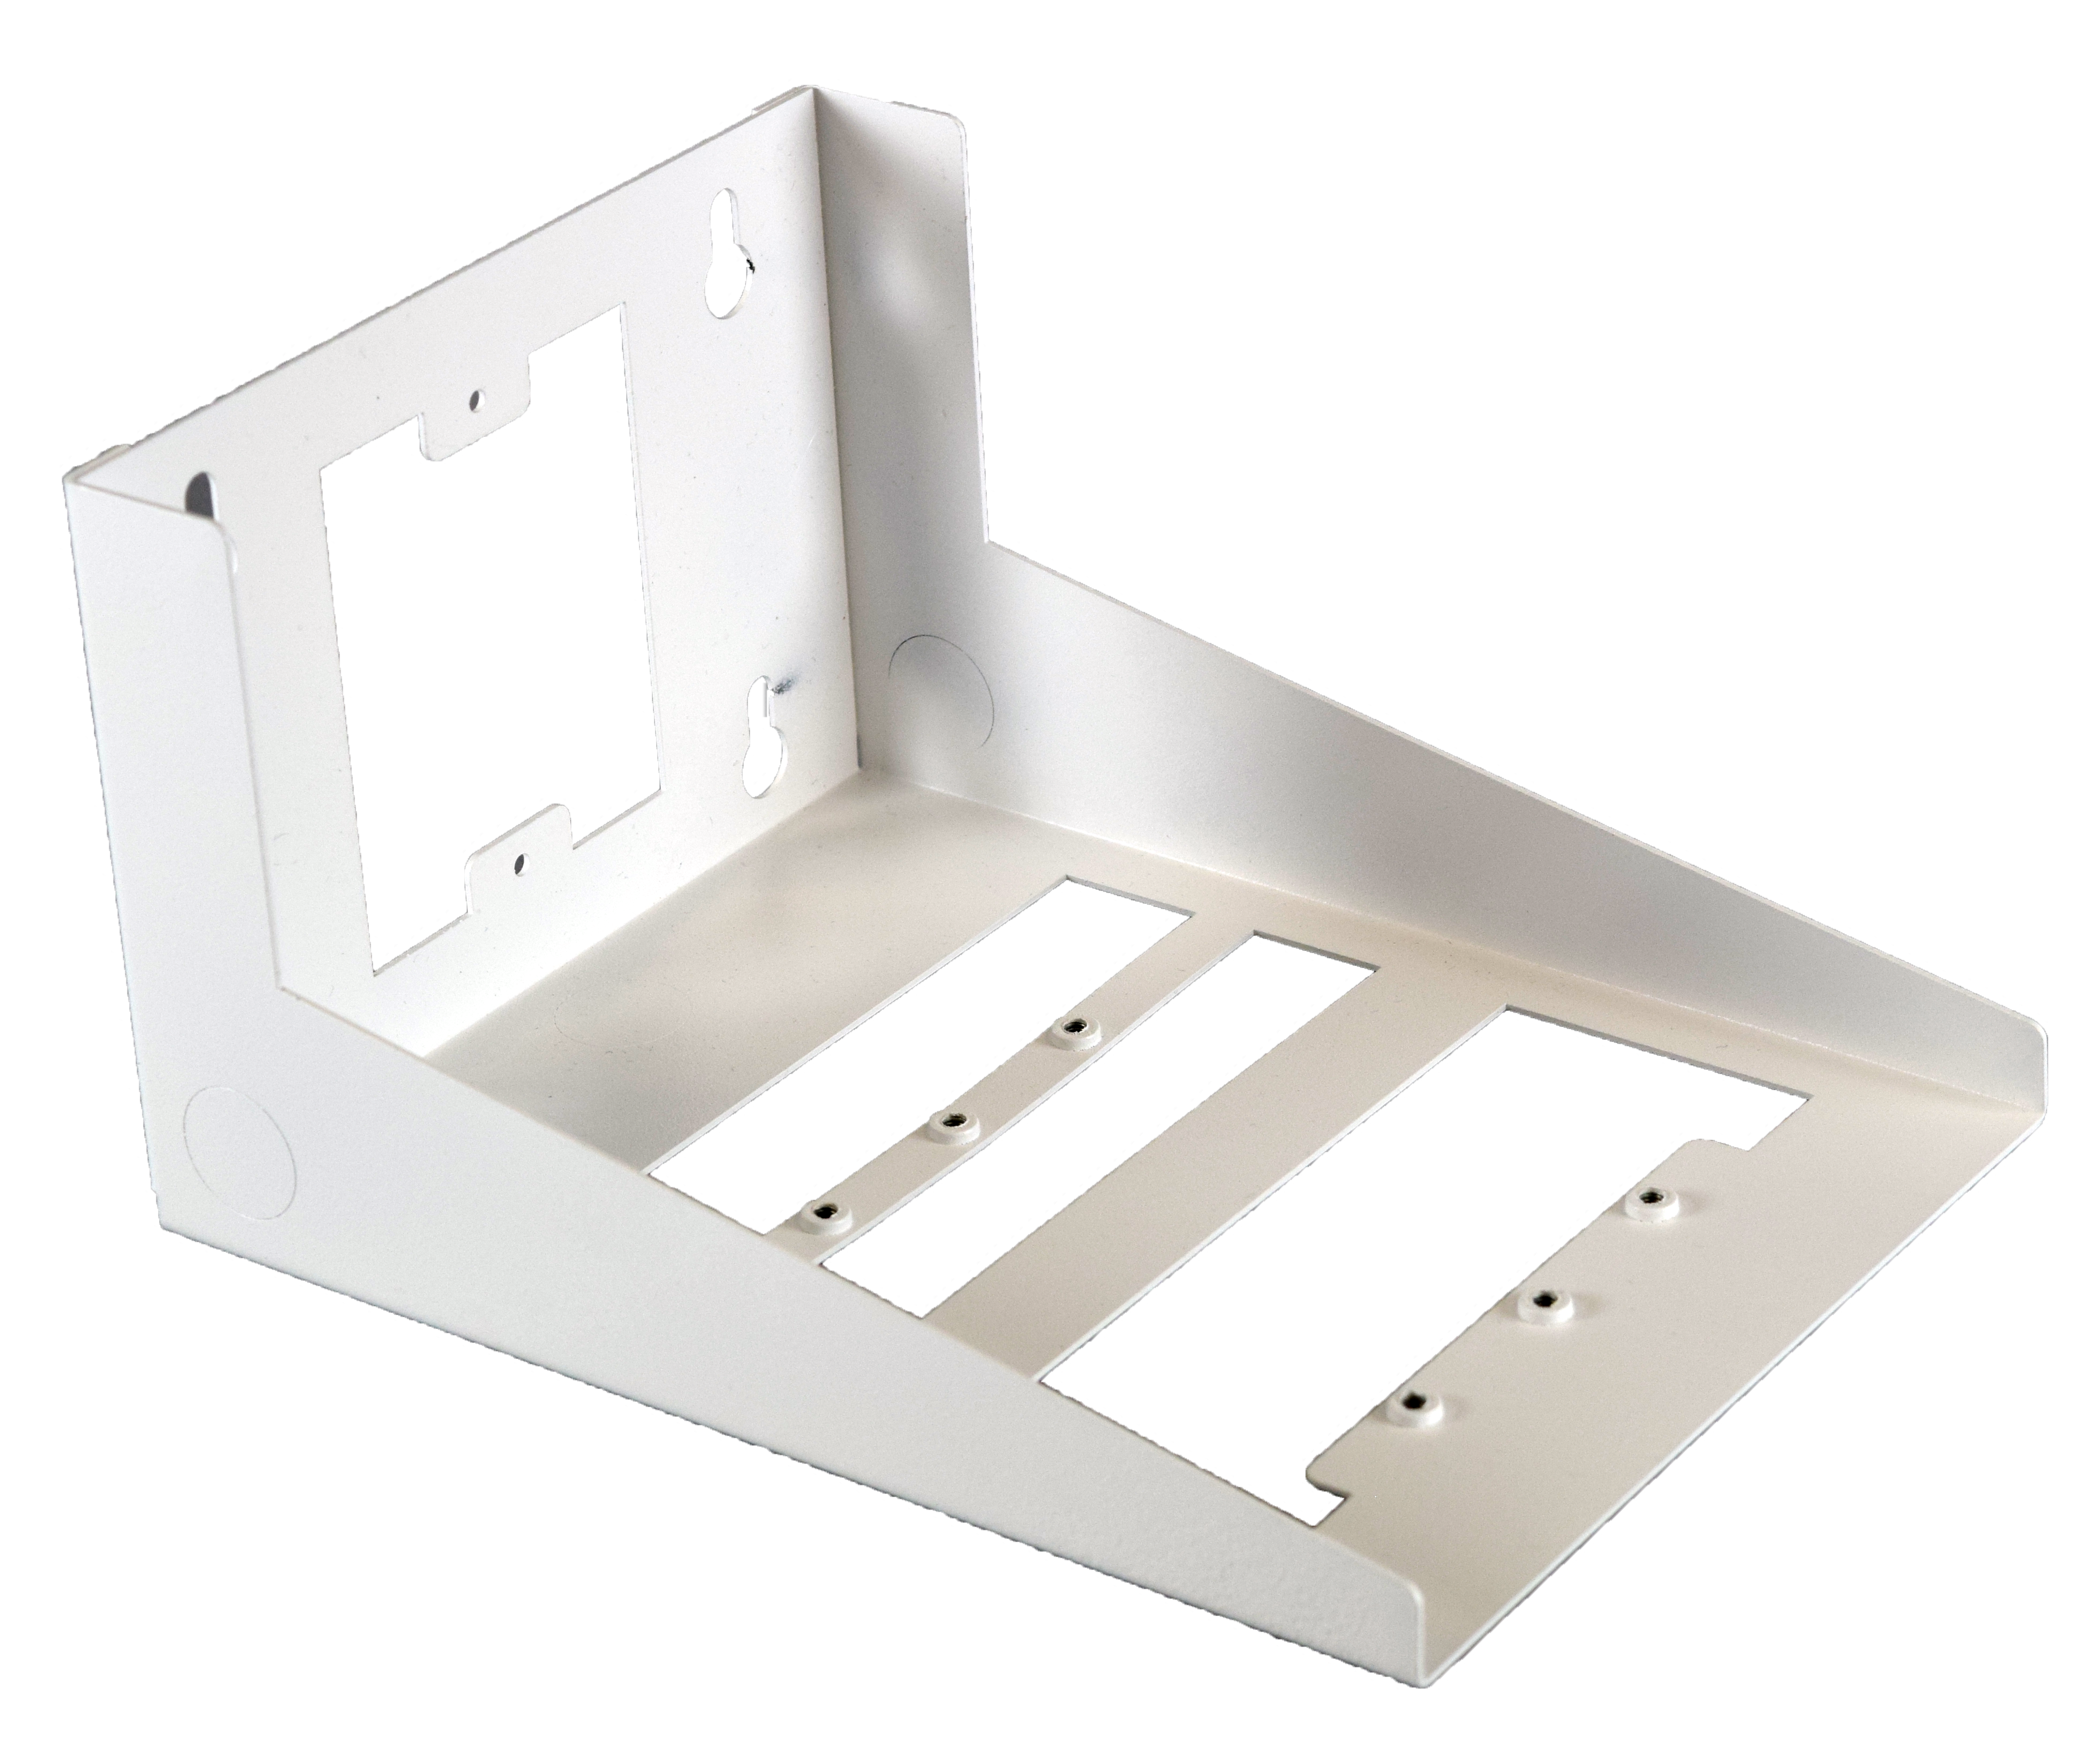 Original Image: Ventev – Right Angle Bracket for Wi-Fi Access Points